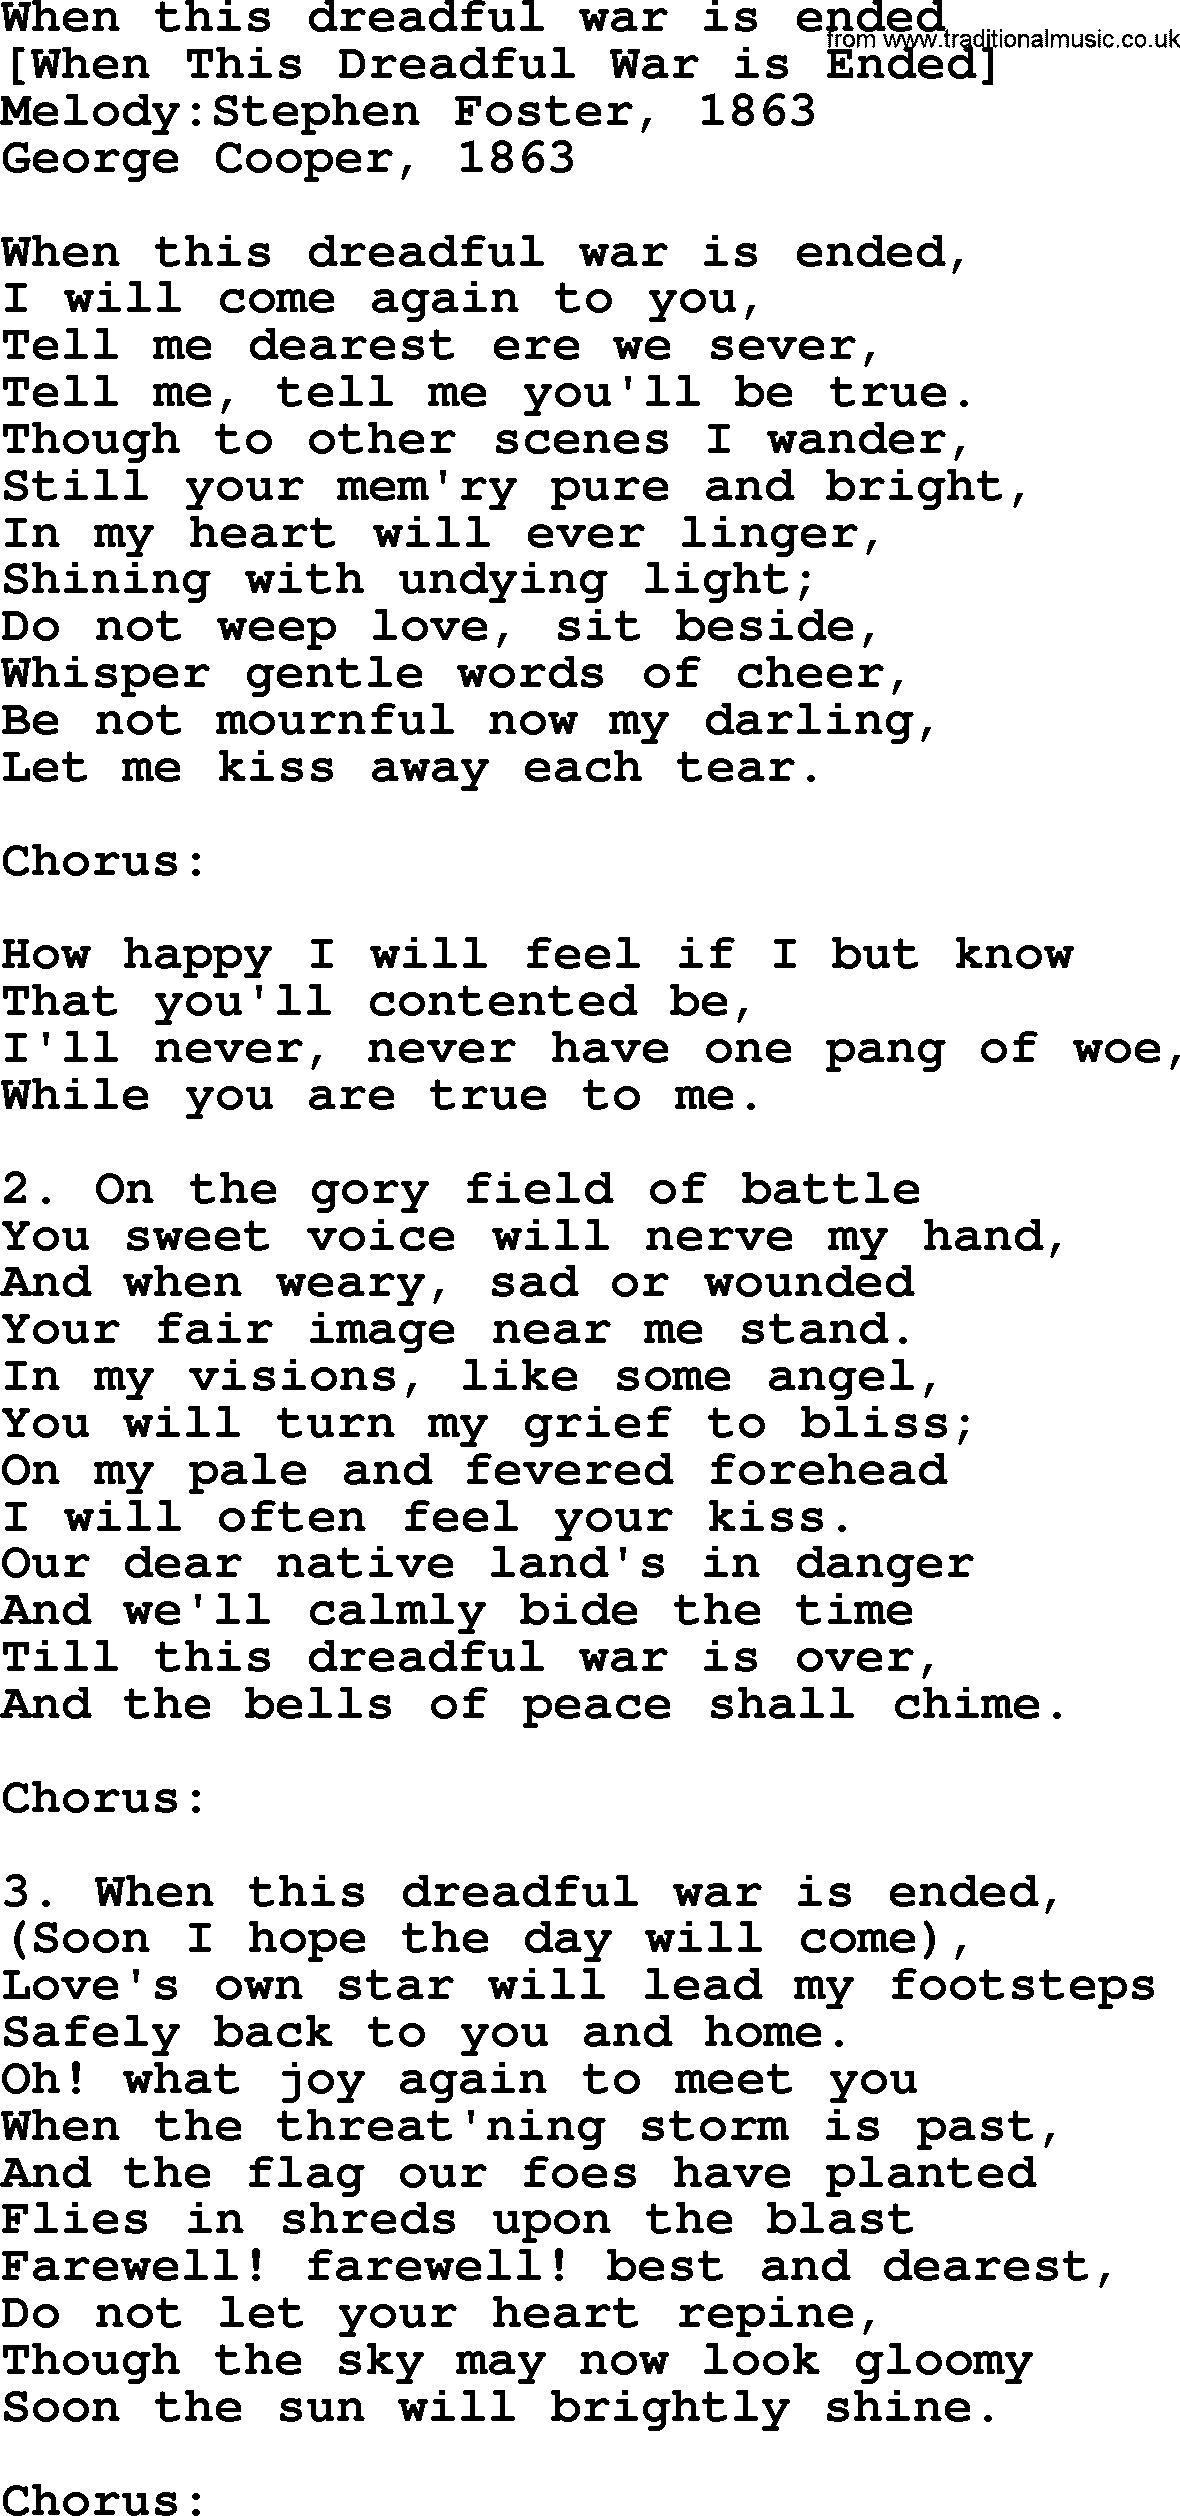 Old American Song: When This Dreadful War Is Ended, lyrics